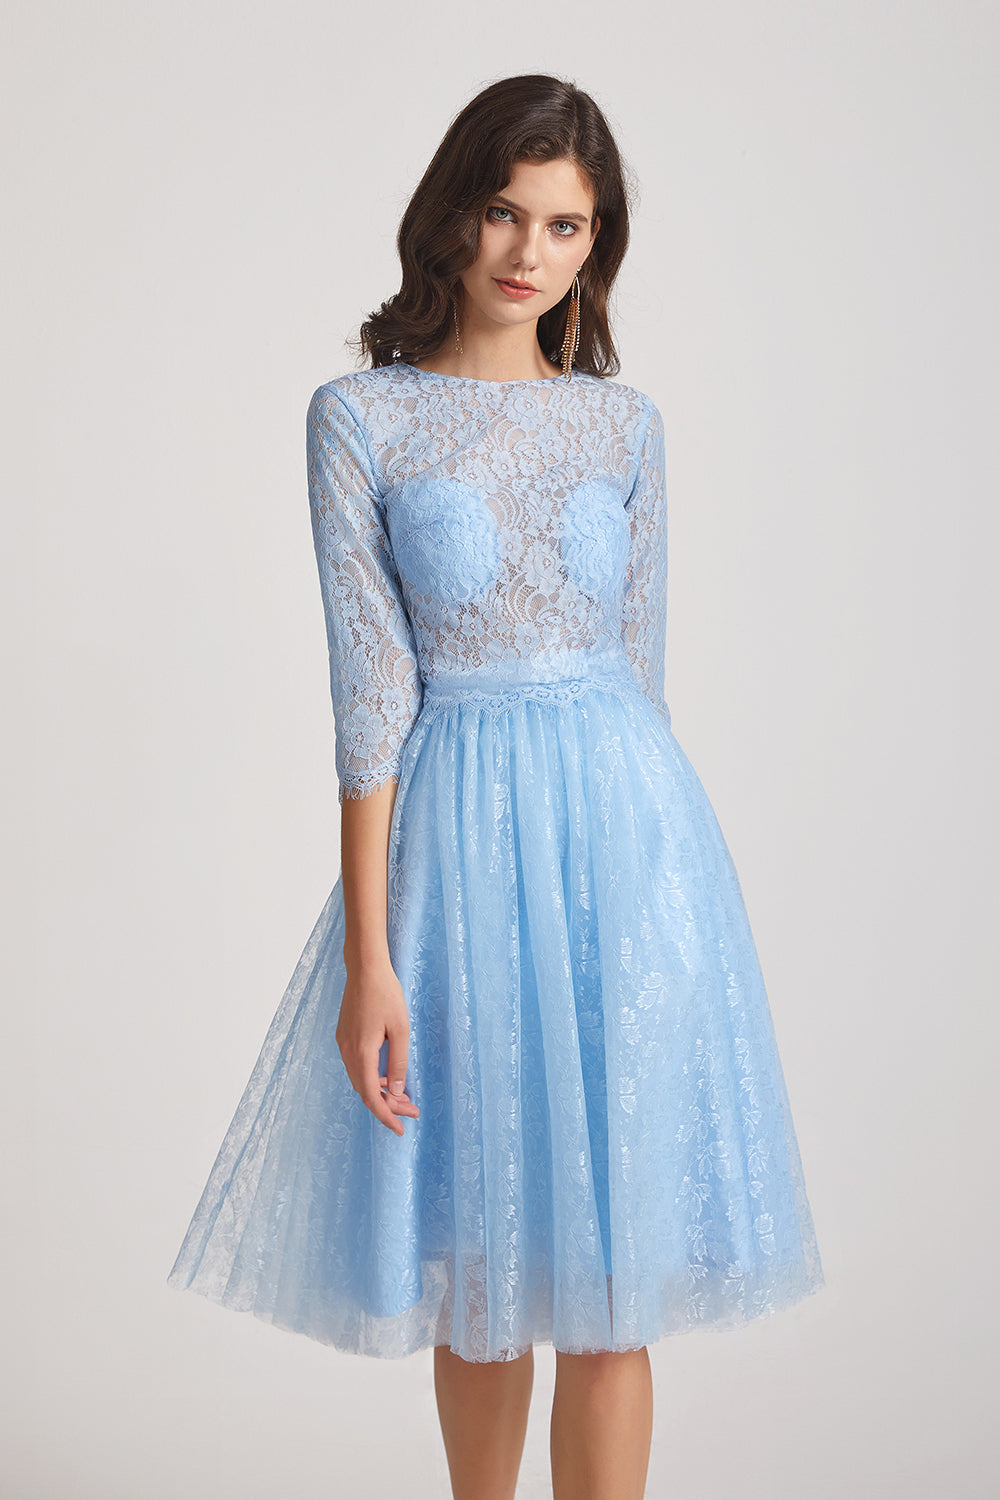 3/4 sleeves lace a-line bridesmaid gowns